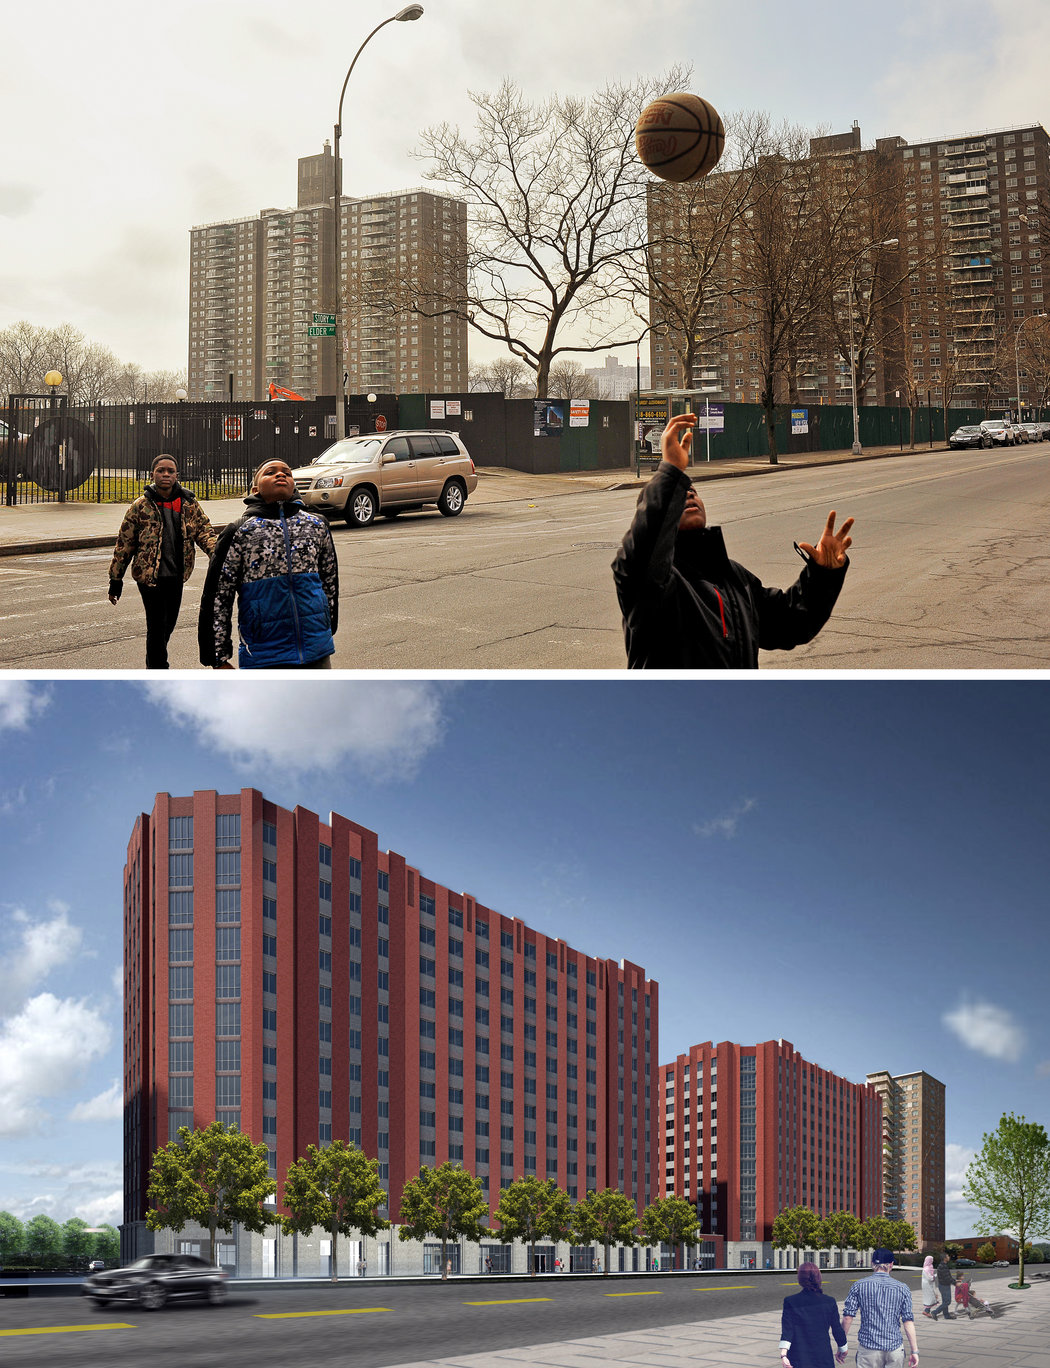 The work site of 1520 and 1530 Story Avenue in the Soundview section of the Bronx, which will become red-brick affordable towers with 435 apartments